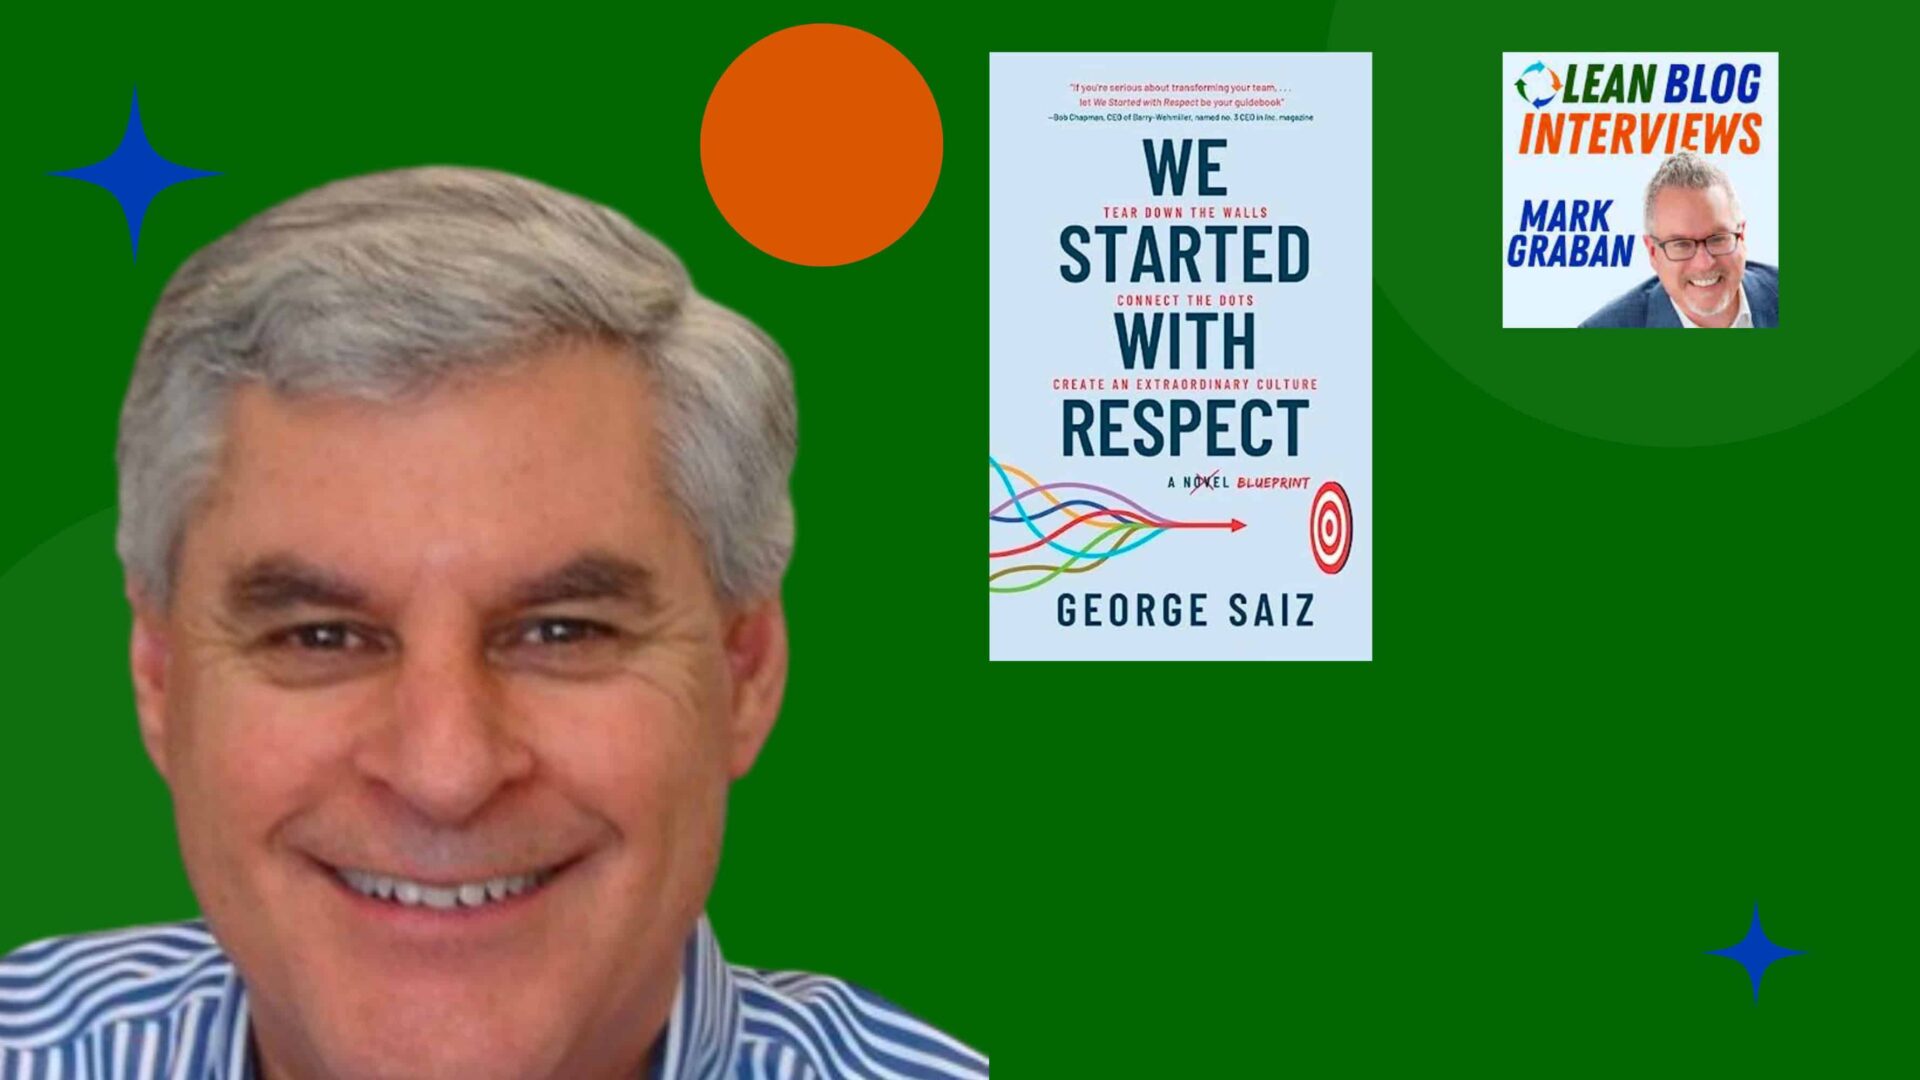 George Saiz on “We Started With Respect” and His Career Focused on Improvement